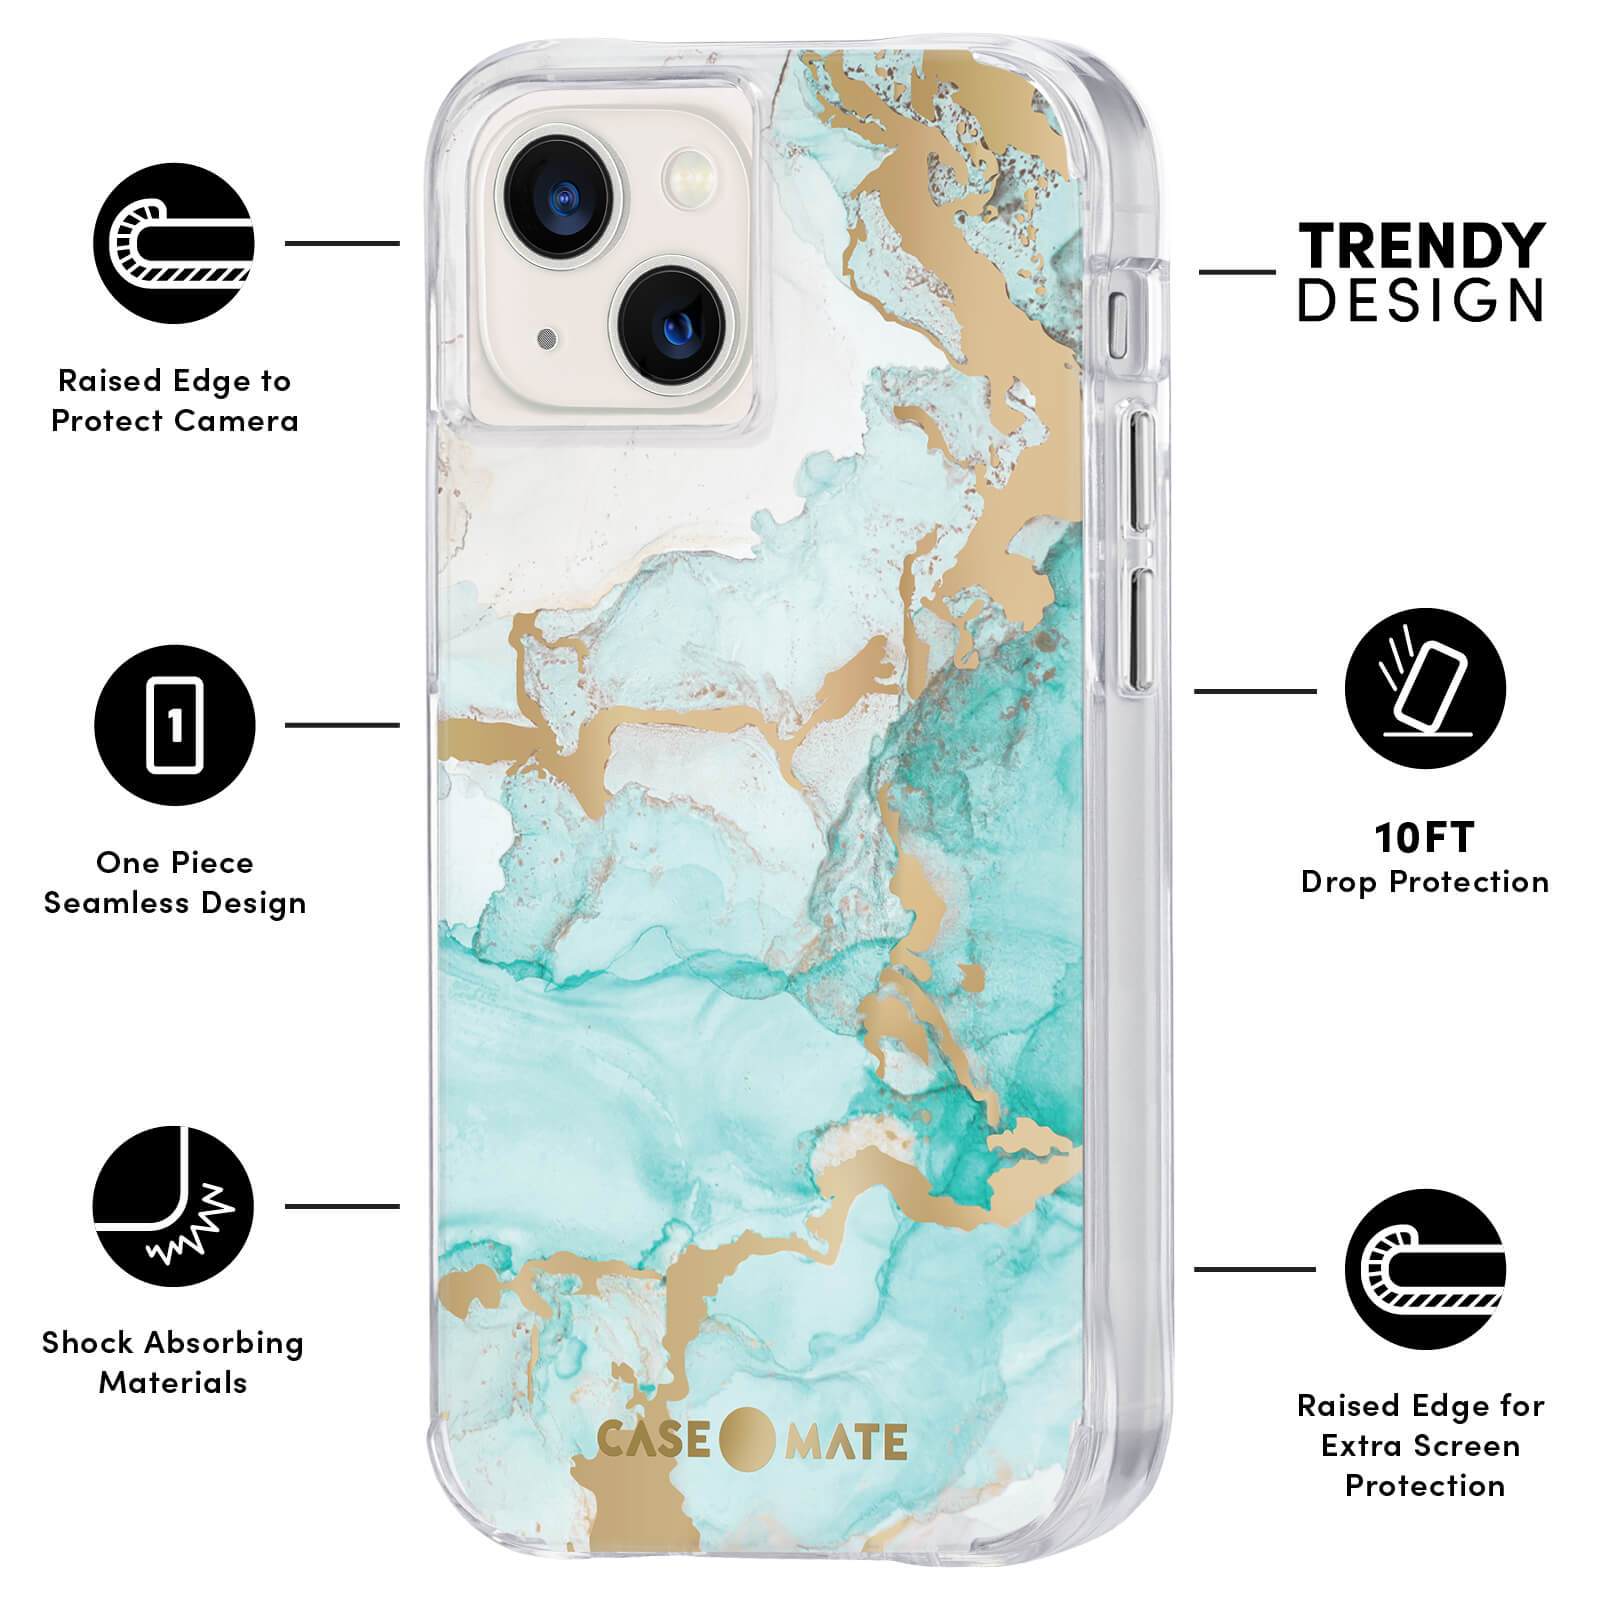 FEATURES: RAISED EDGE TO PROTECT CAMERA, ONE PIECE SEAMLESS DESIGN, SHOCK ABSORBING MATERIALS, TRENDY DESIGN, 10 FT DROP PROTECTION, RAISED EDGE FOR EXTRA SCREEN PROTECTION. COLOR::OCEAN MARBLE